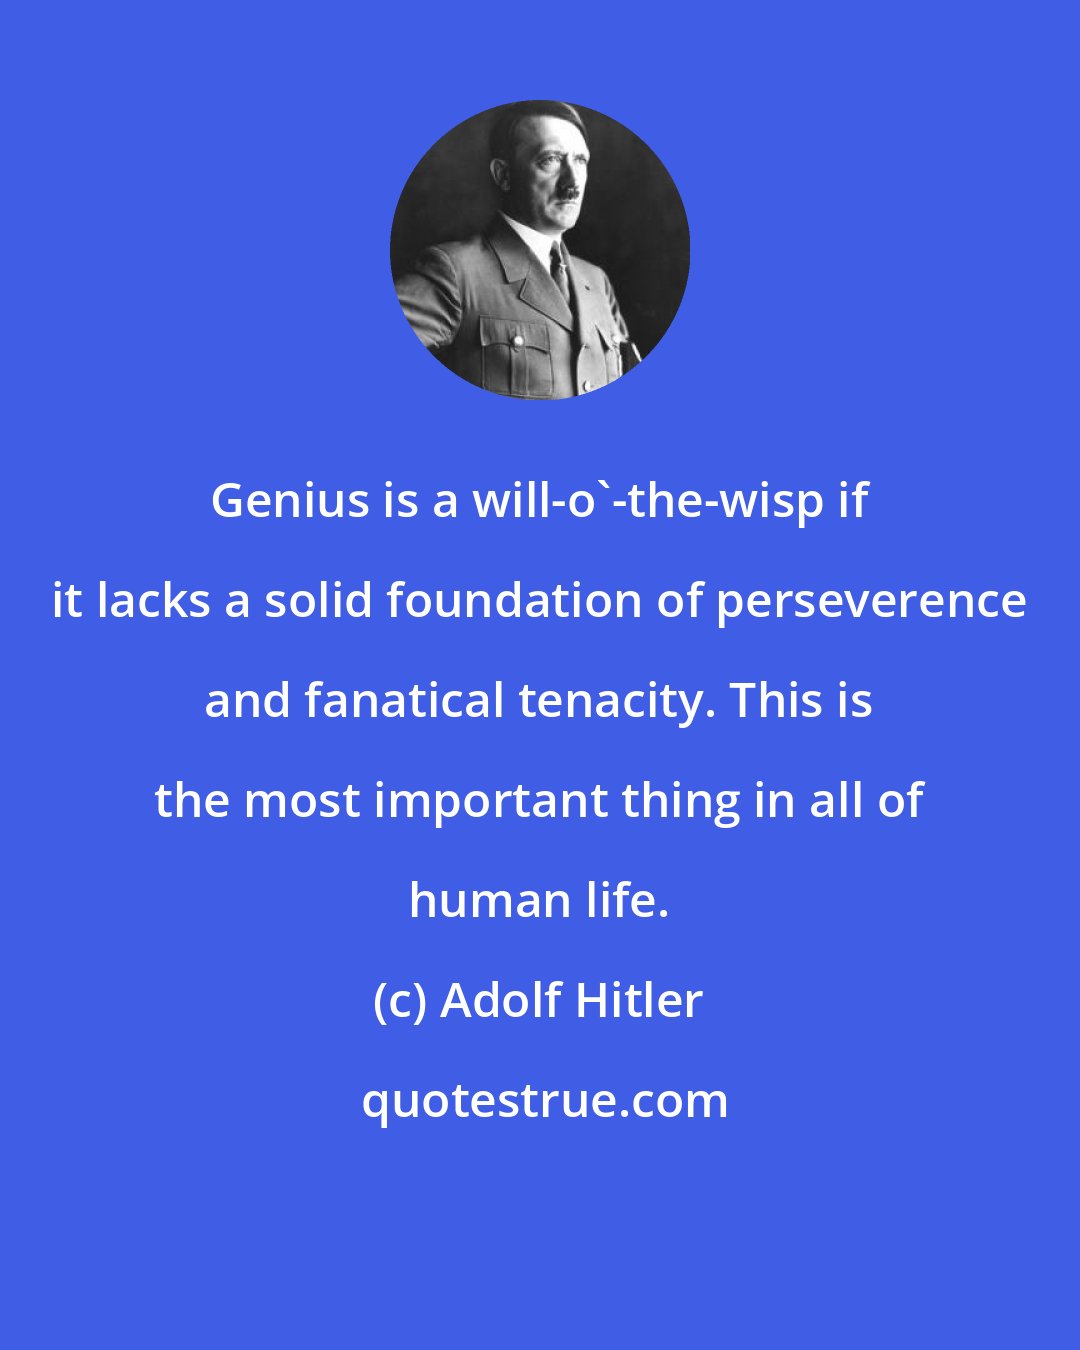 Adolf Hitler: Genius is a will-o'-the-wisp if it lacks a solid foundation of perseverence and fanatical tenacity. This is the most important thing in all of human life.